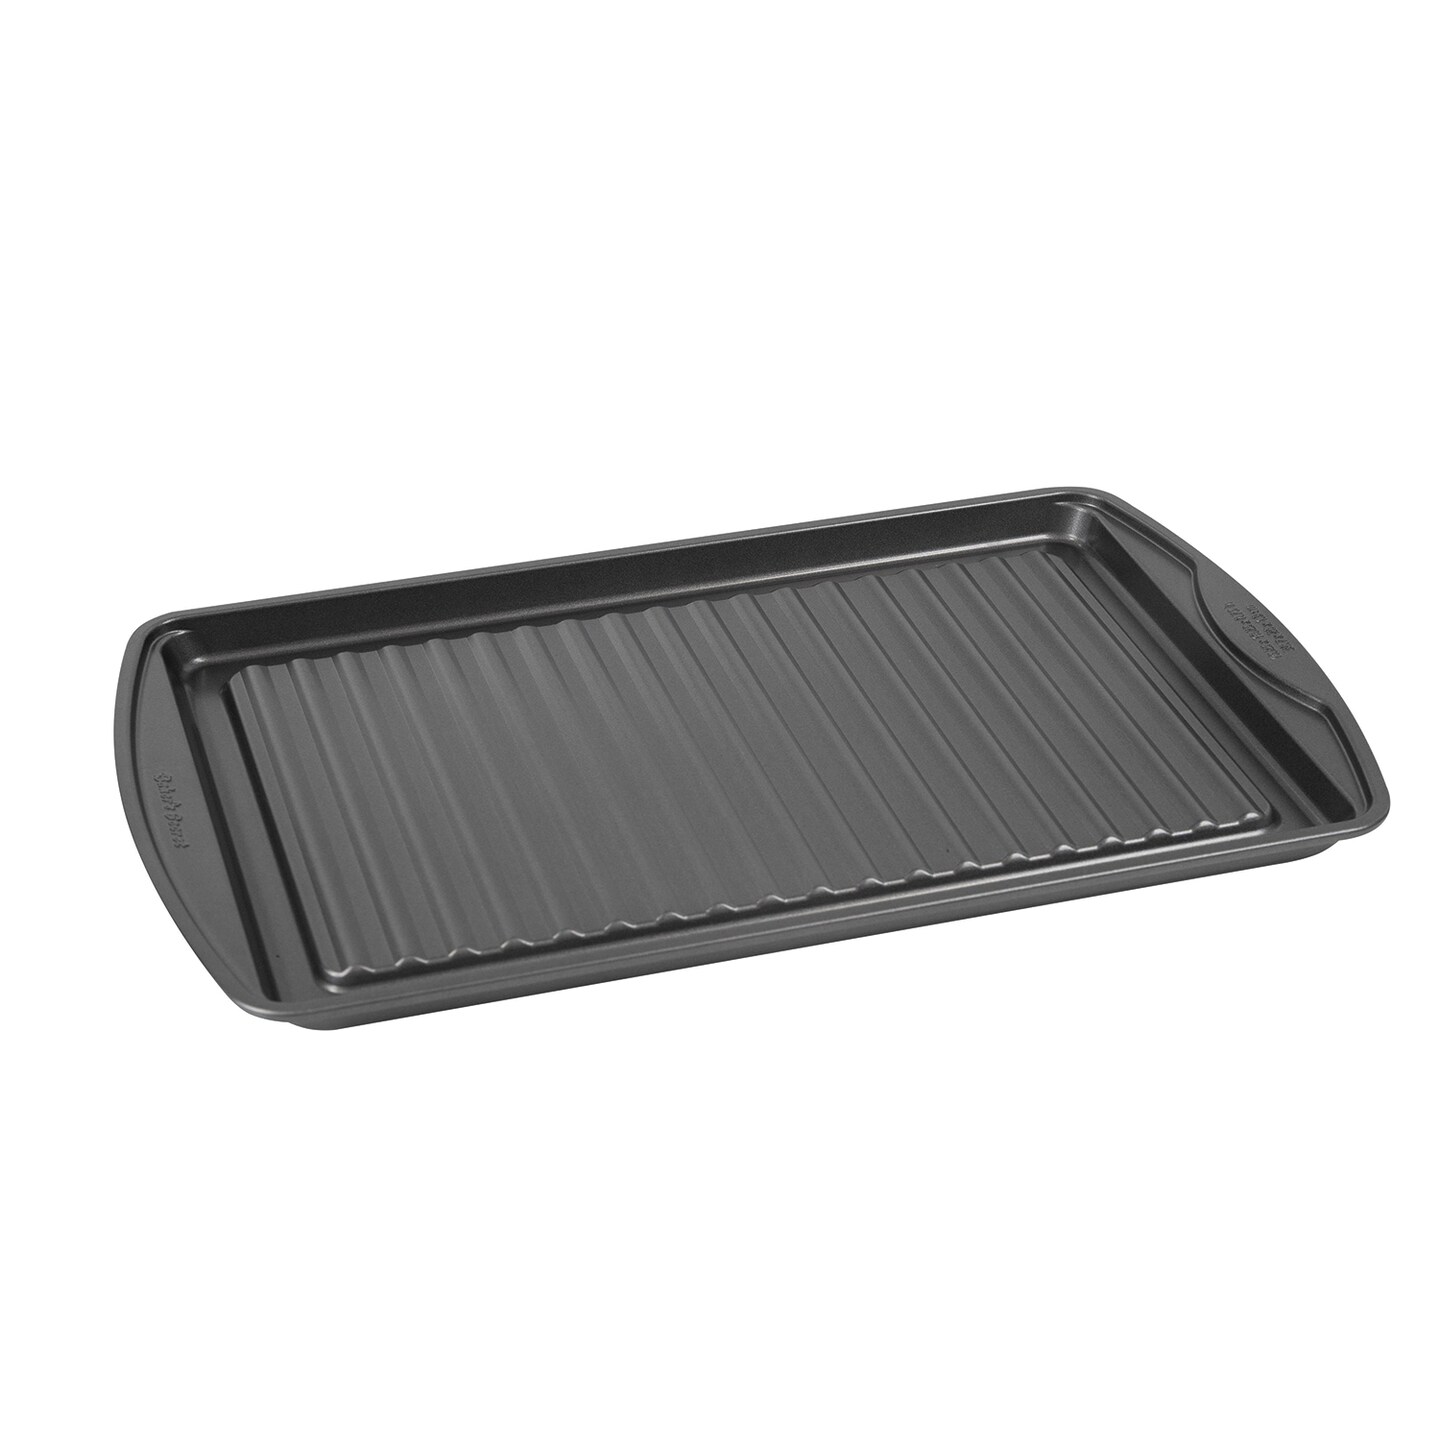 Baker&#x27;s Secret Nonstick Grill Pan for Oven 17.5&#x22; x 11&#x22;, Carbon Steel Oven Grill Skillet with Premium Food-Grade Coating, Non-stick Grill Pan, Roasting Baking Supplies - Classic Collection